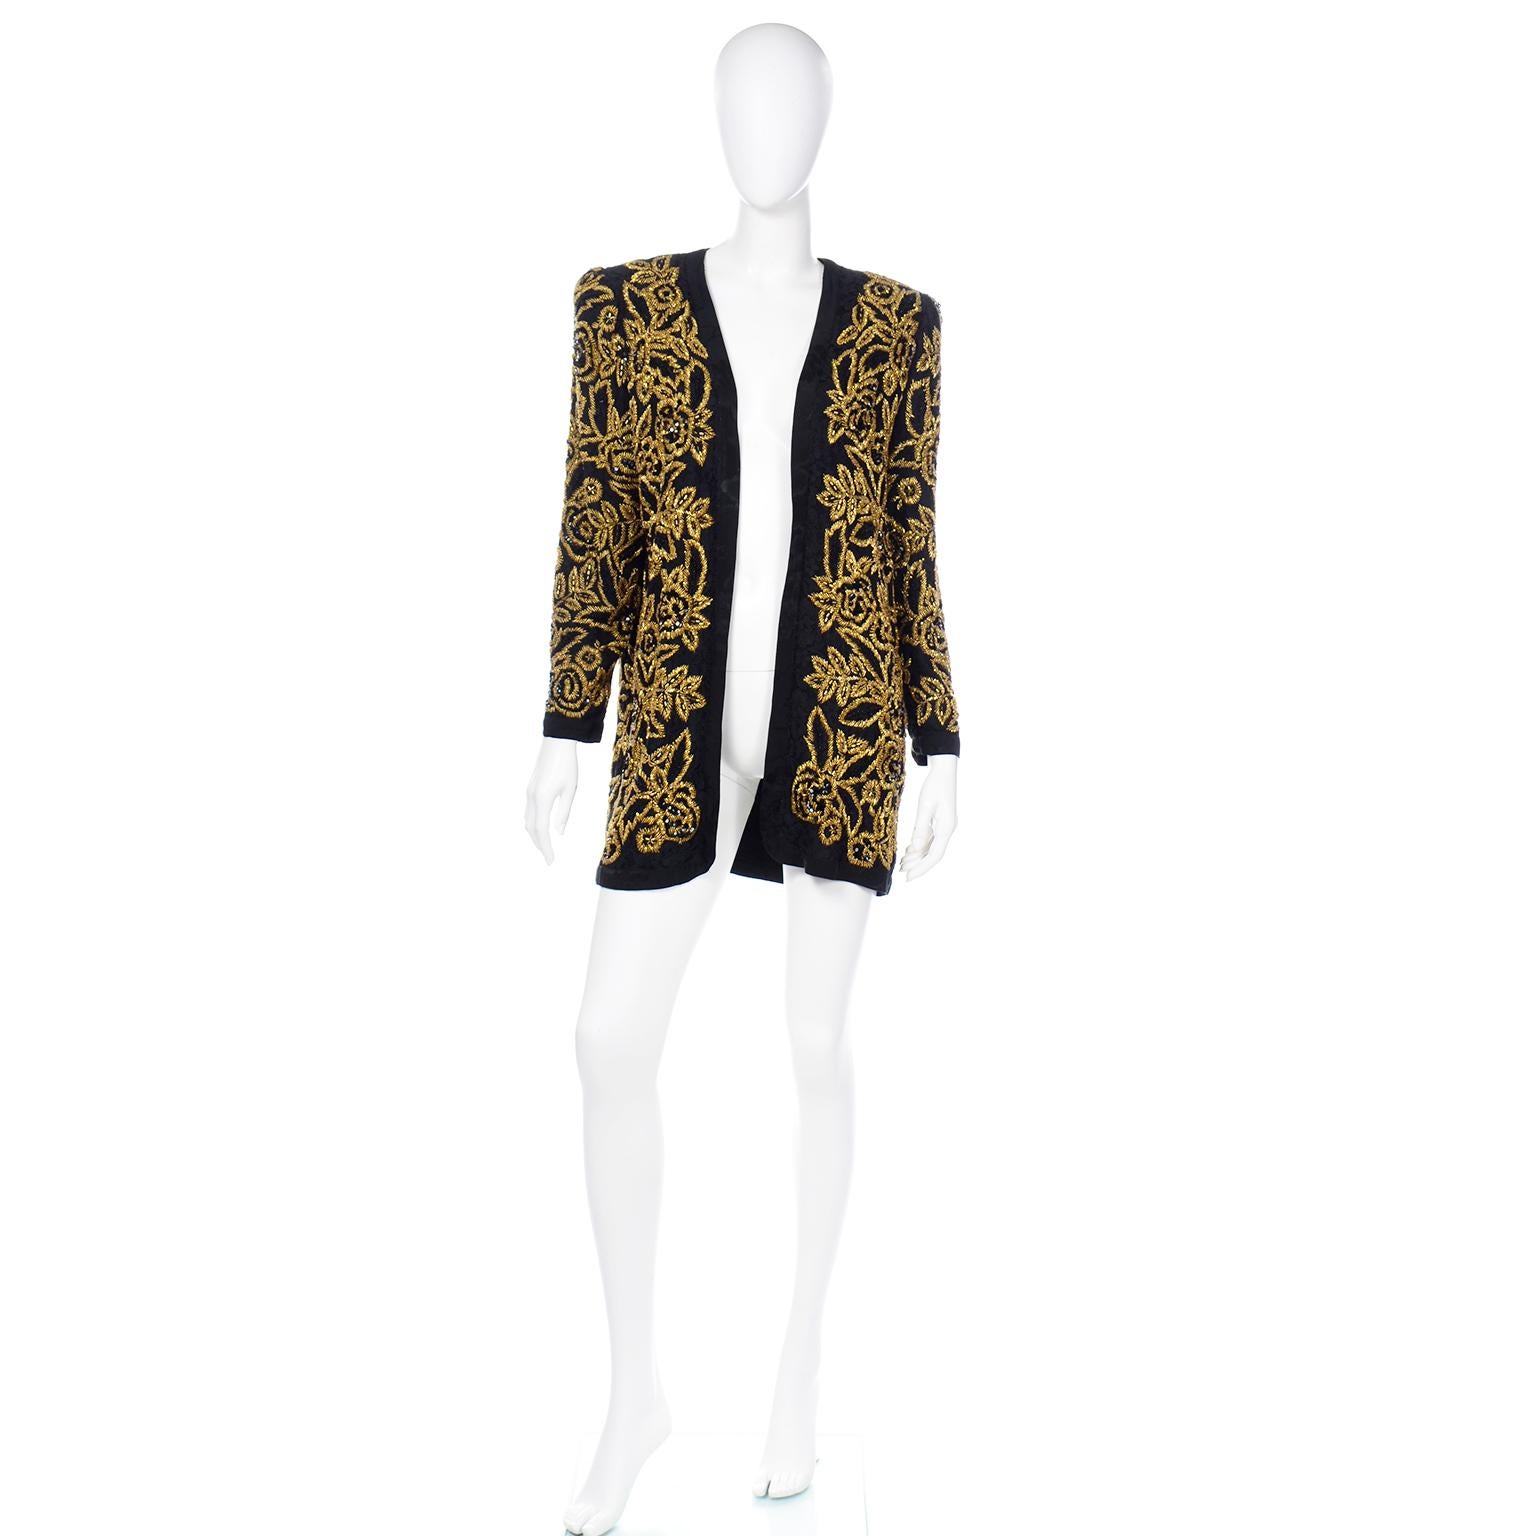 This stunning vintage Diane Freis open front evening jacket in a lovely black lace, covered with black and gold beads that are embroidered into a floral design.soutache embroidered base fabric. The lining is a black tonal silk jacquard floral print